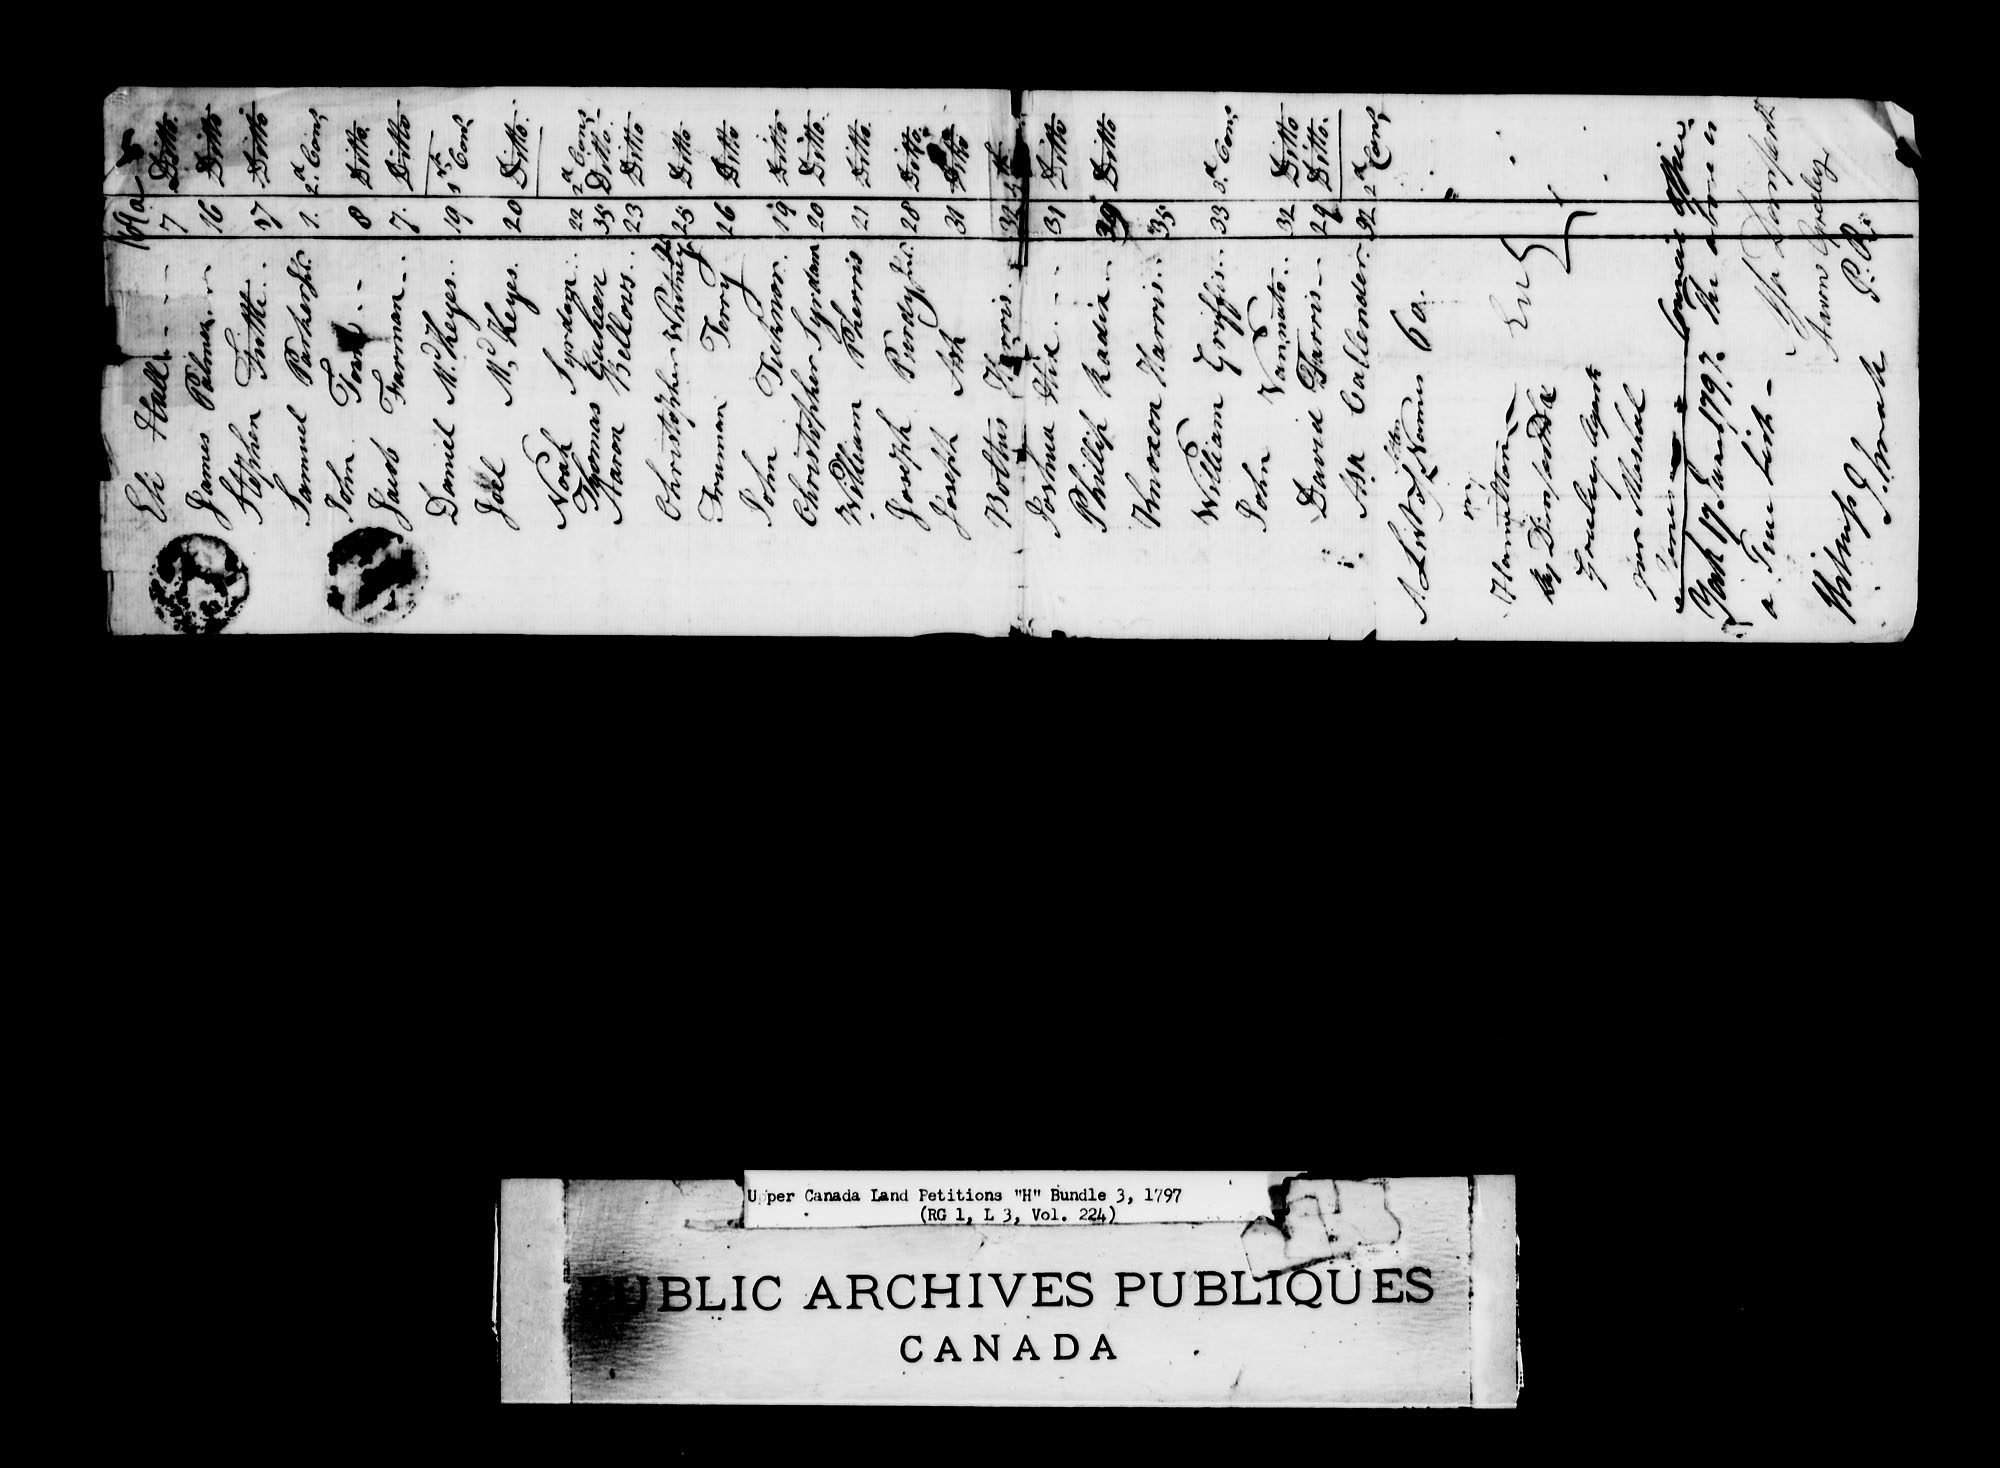 Title: Upper Canada Land Petitions (1763-1865) - Mikan Number: 205131 - Microform: c-2044